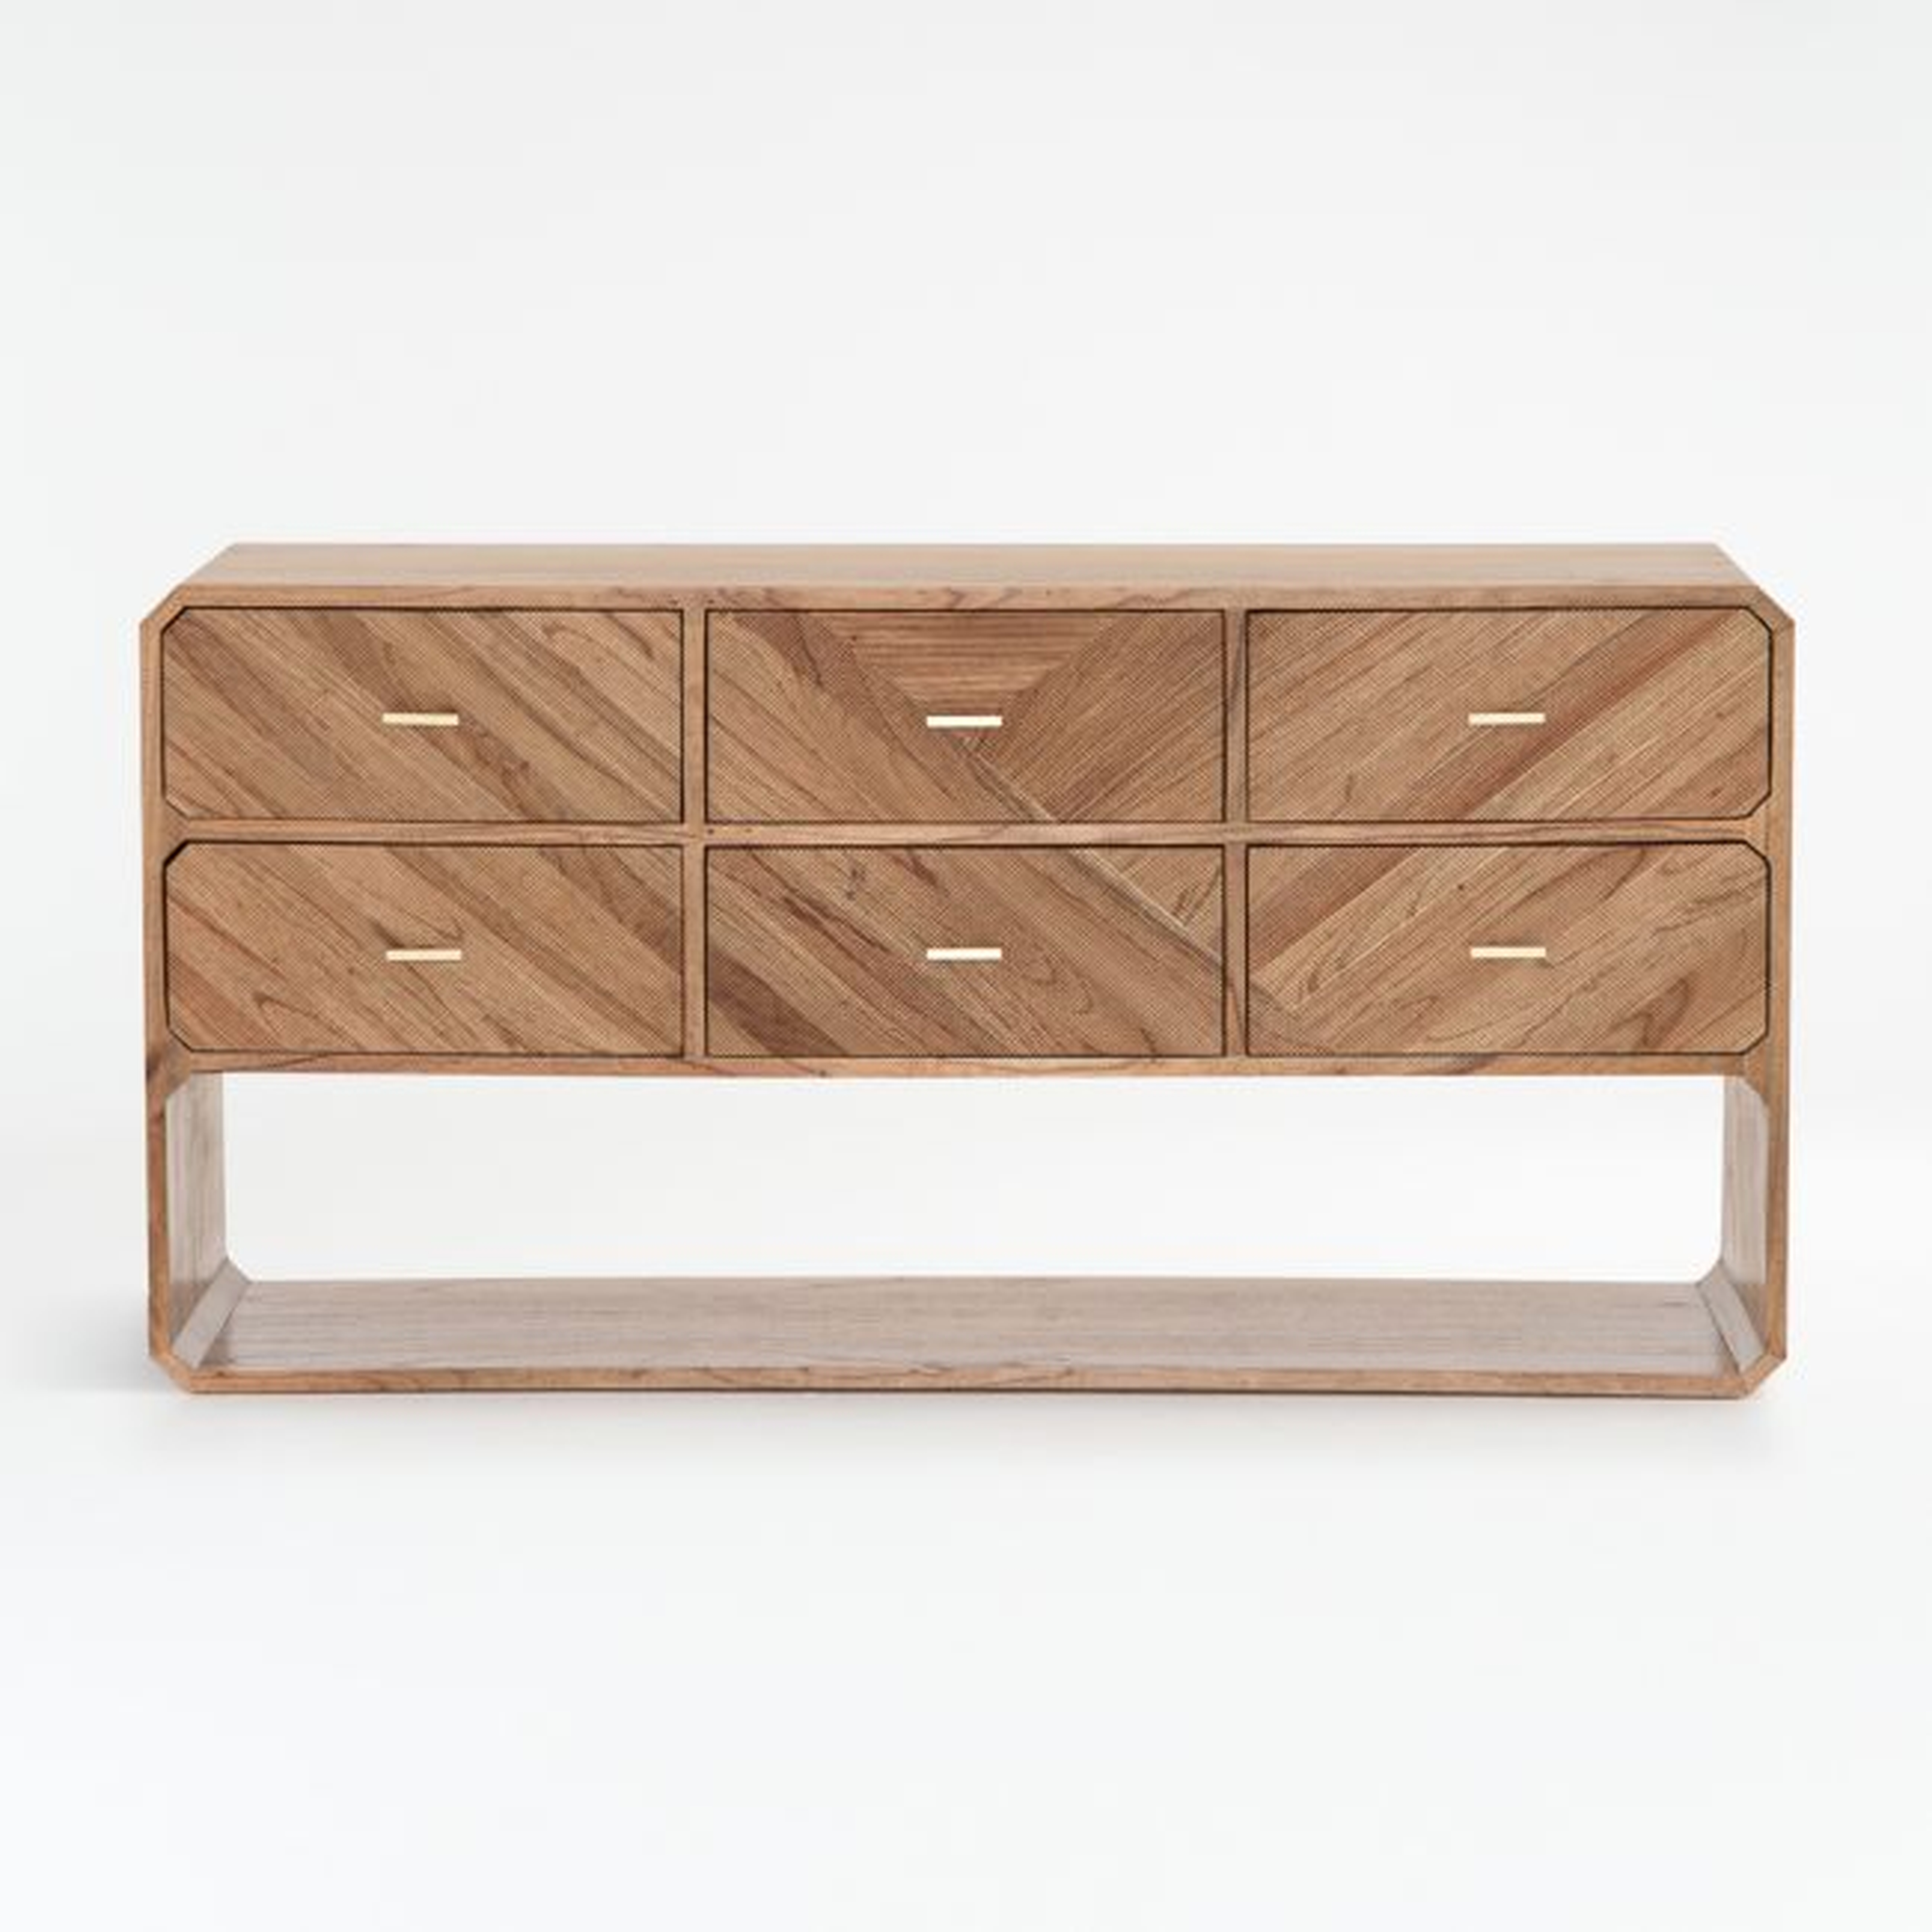 Rove 6-Drawer Dresser - Crate and Barrel